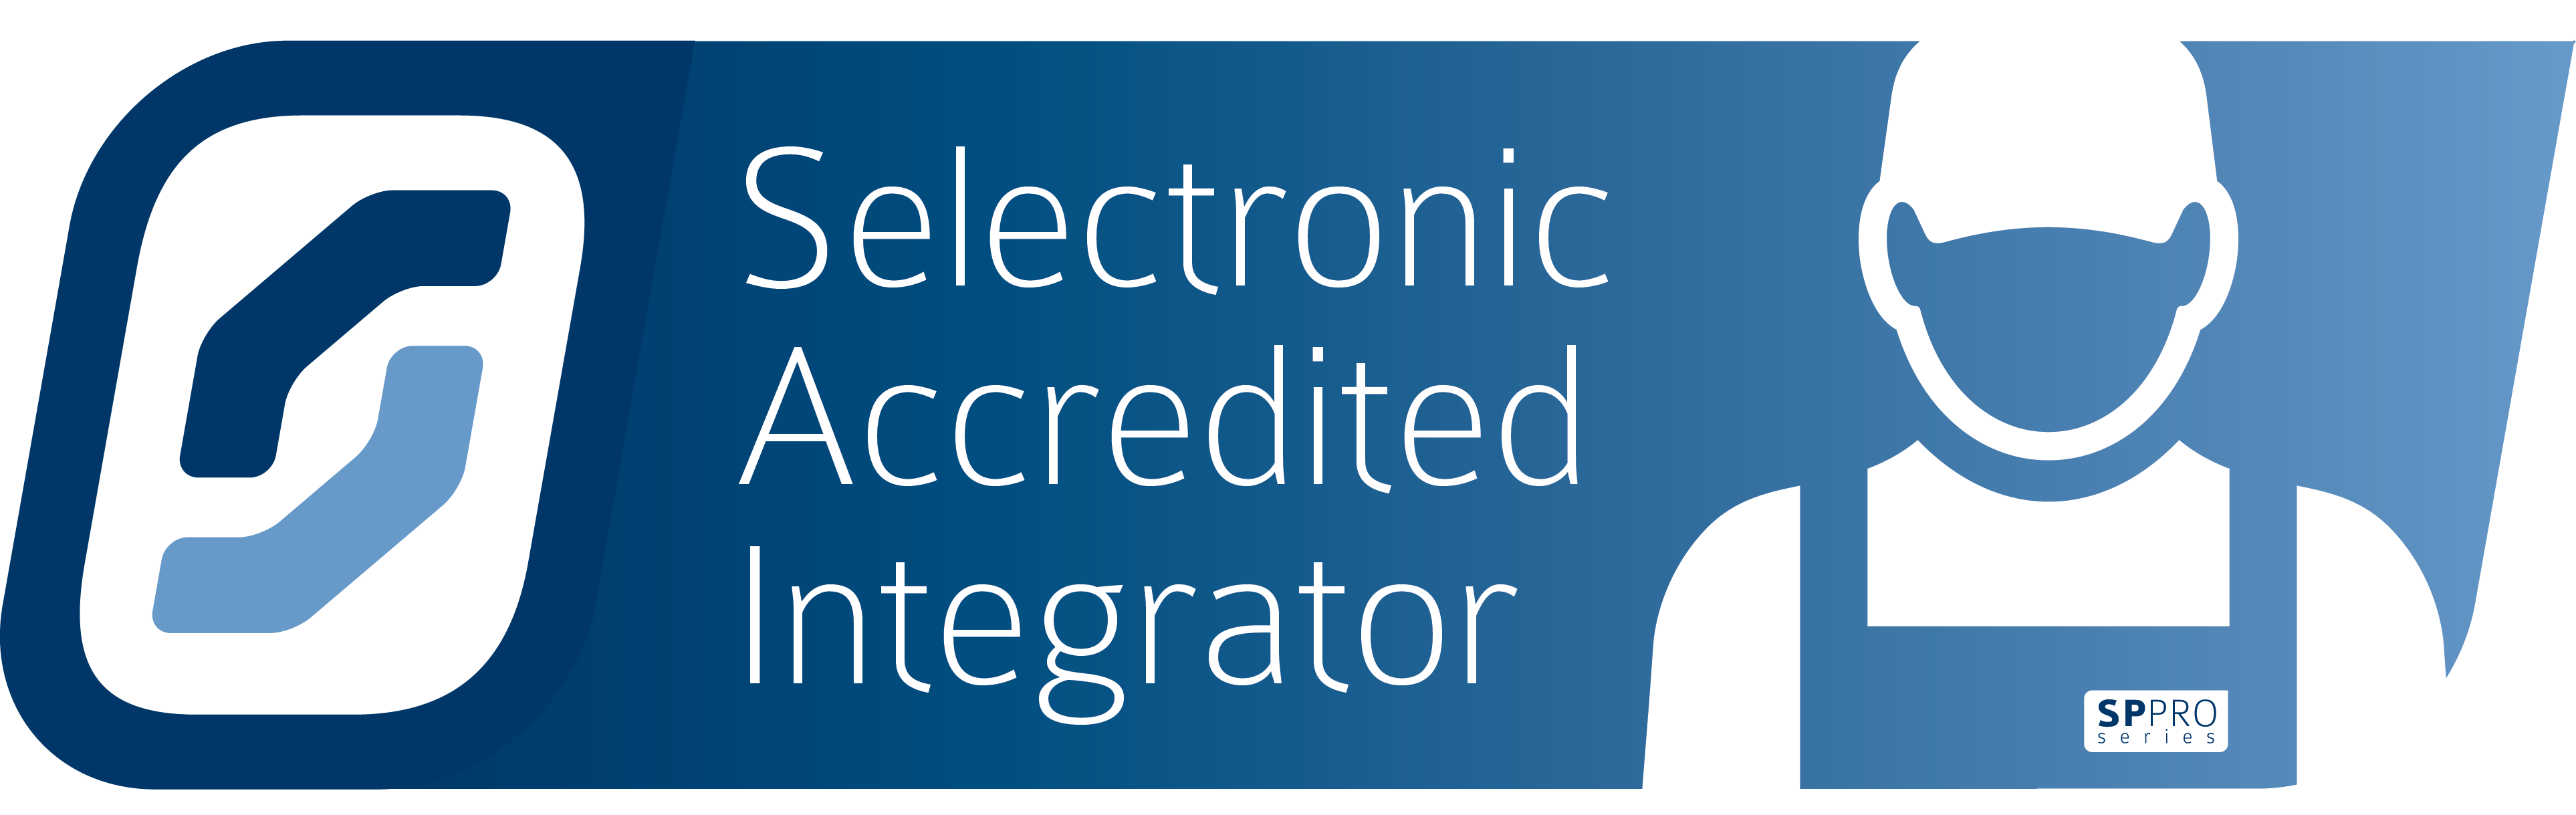 Selectronic-Accredited-Integrator-logo.png